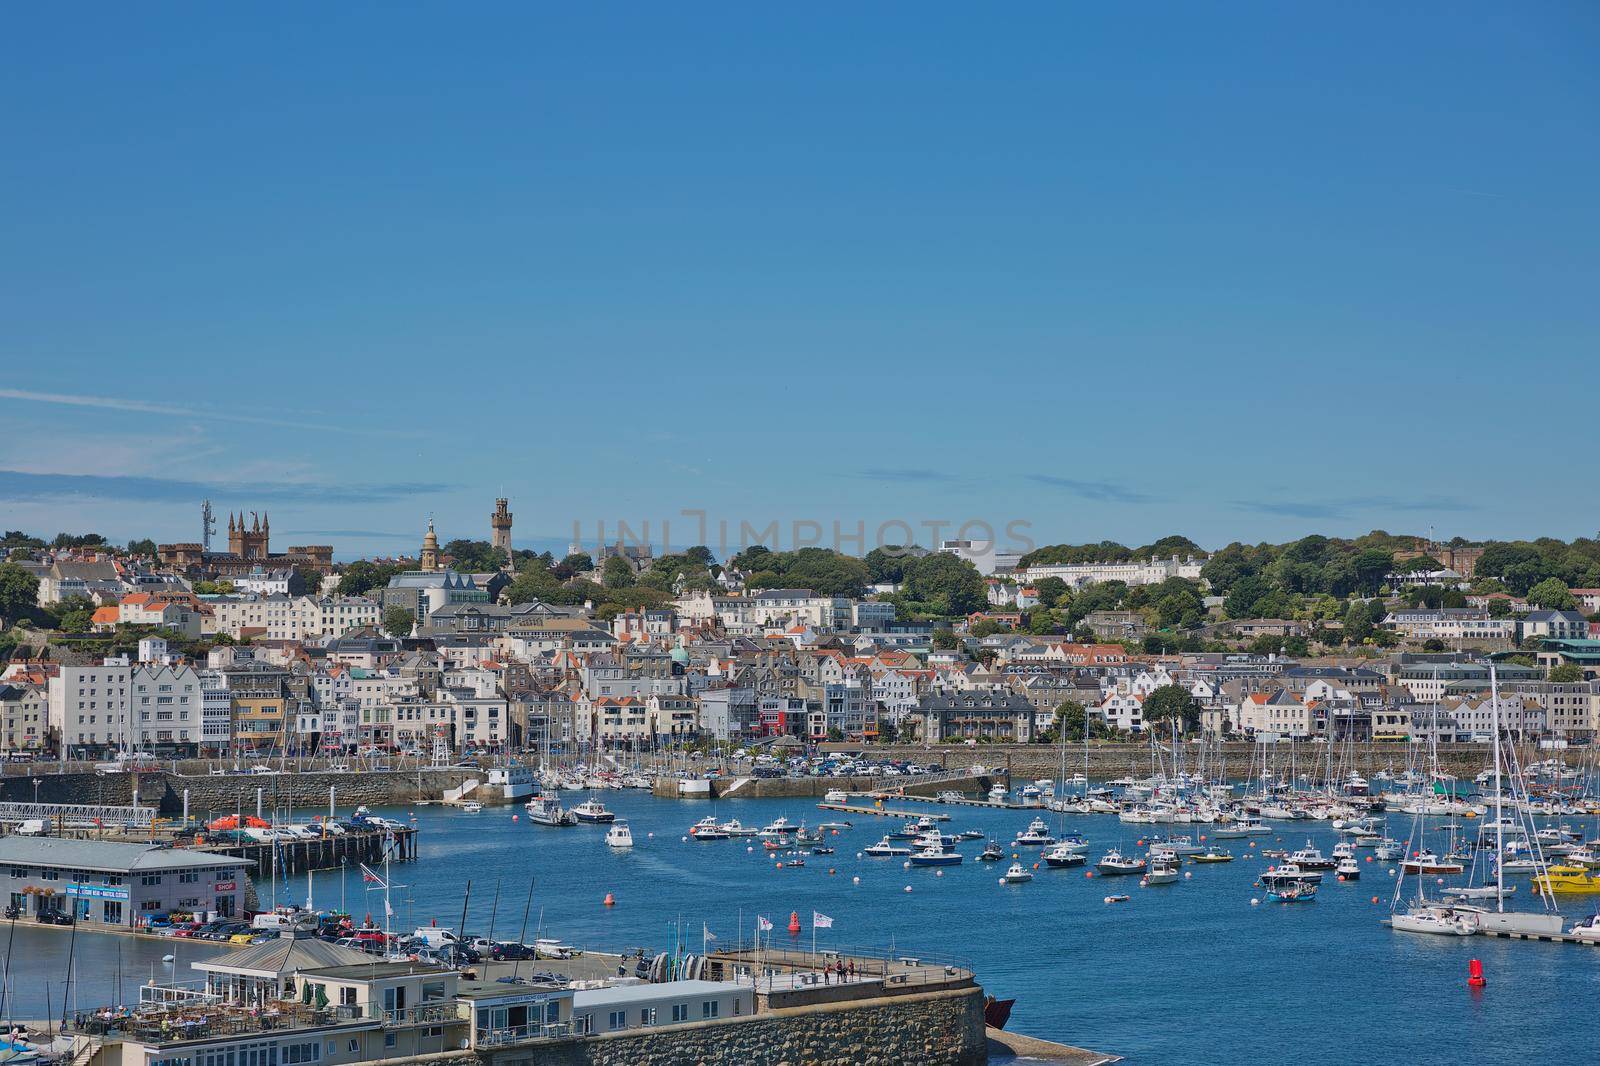 ST. PETER PORT, GUERNSEY, UK - AUGUST 16, 2017: Scenic view of a bay in St. Peter Port in Guernsey, Channel Islands, UK.